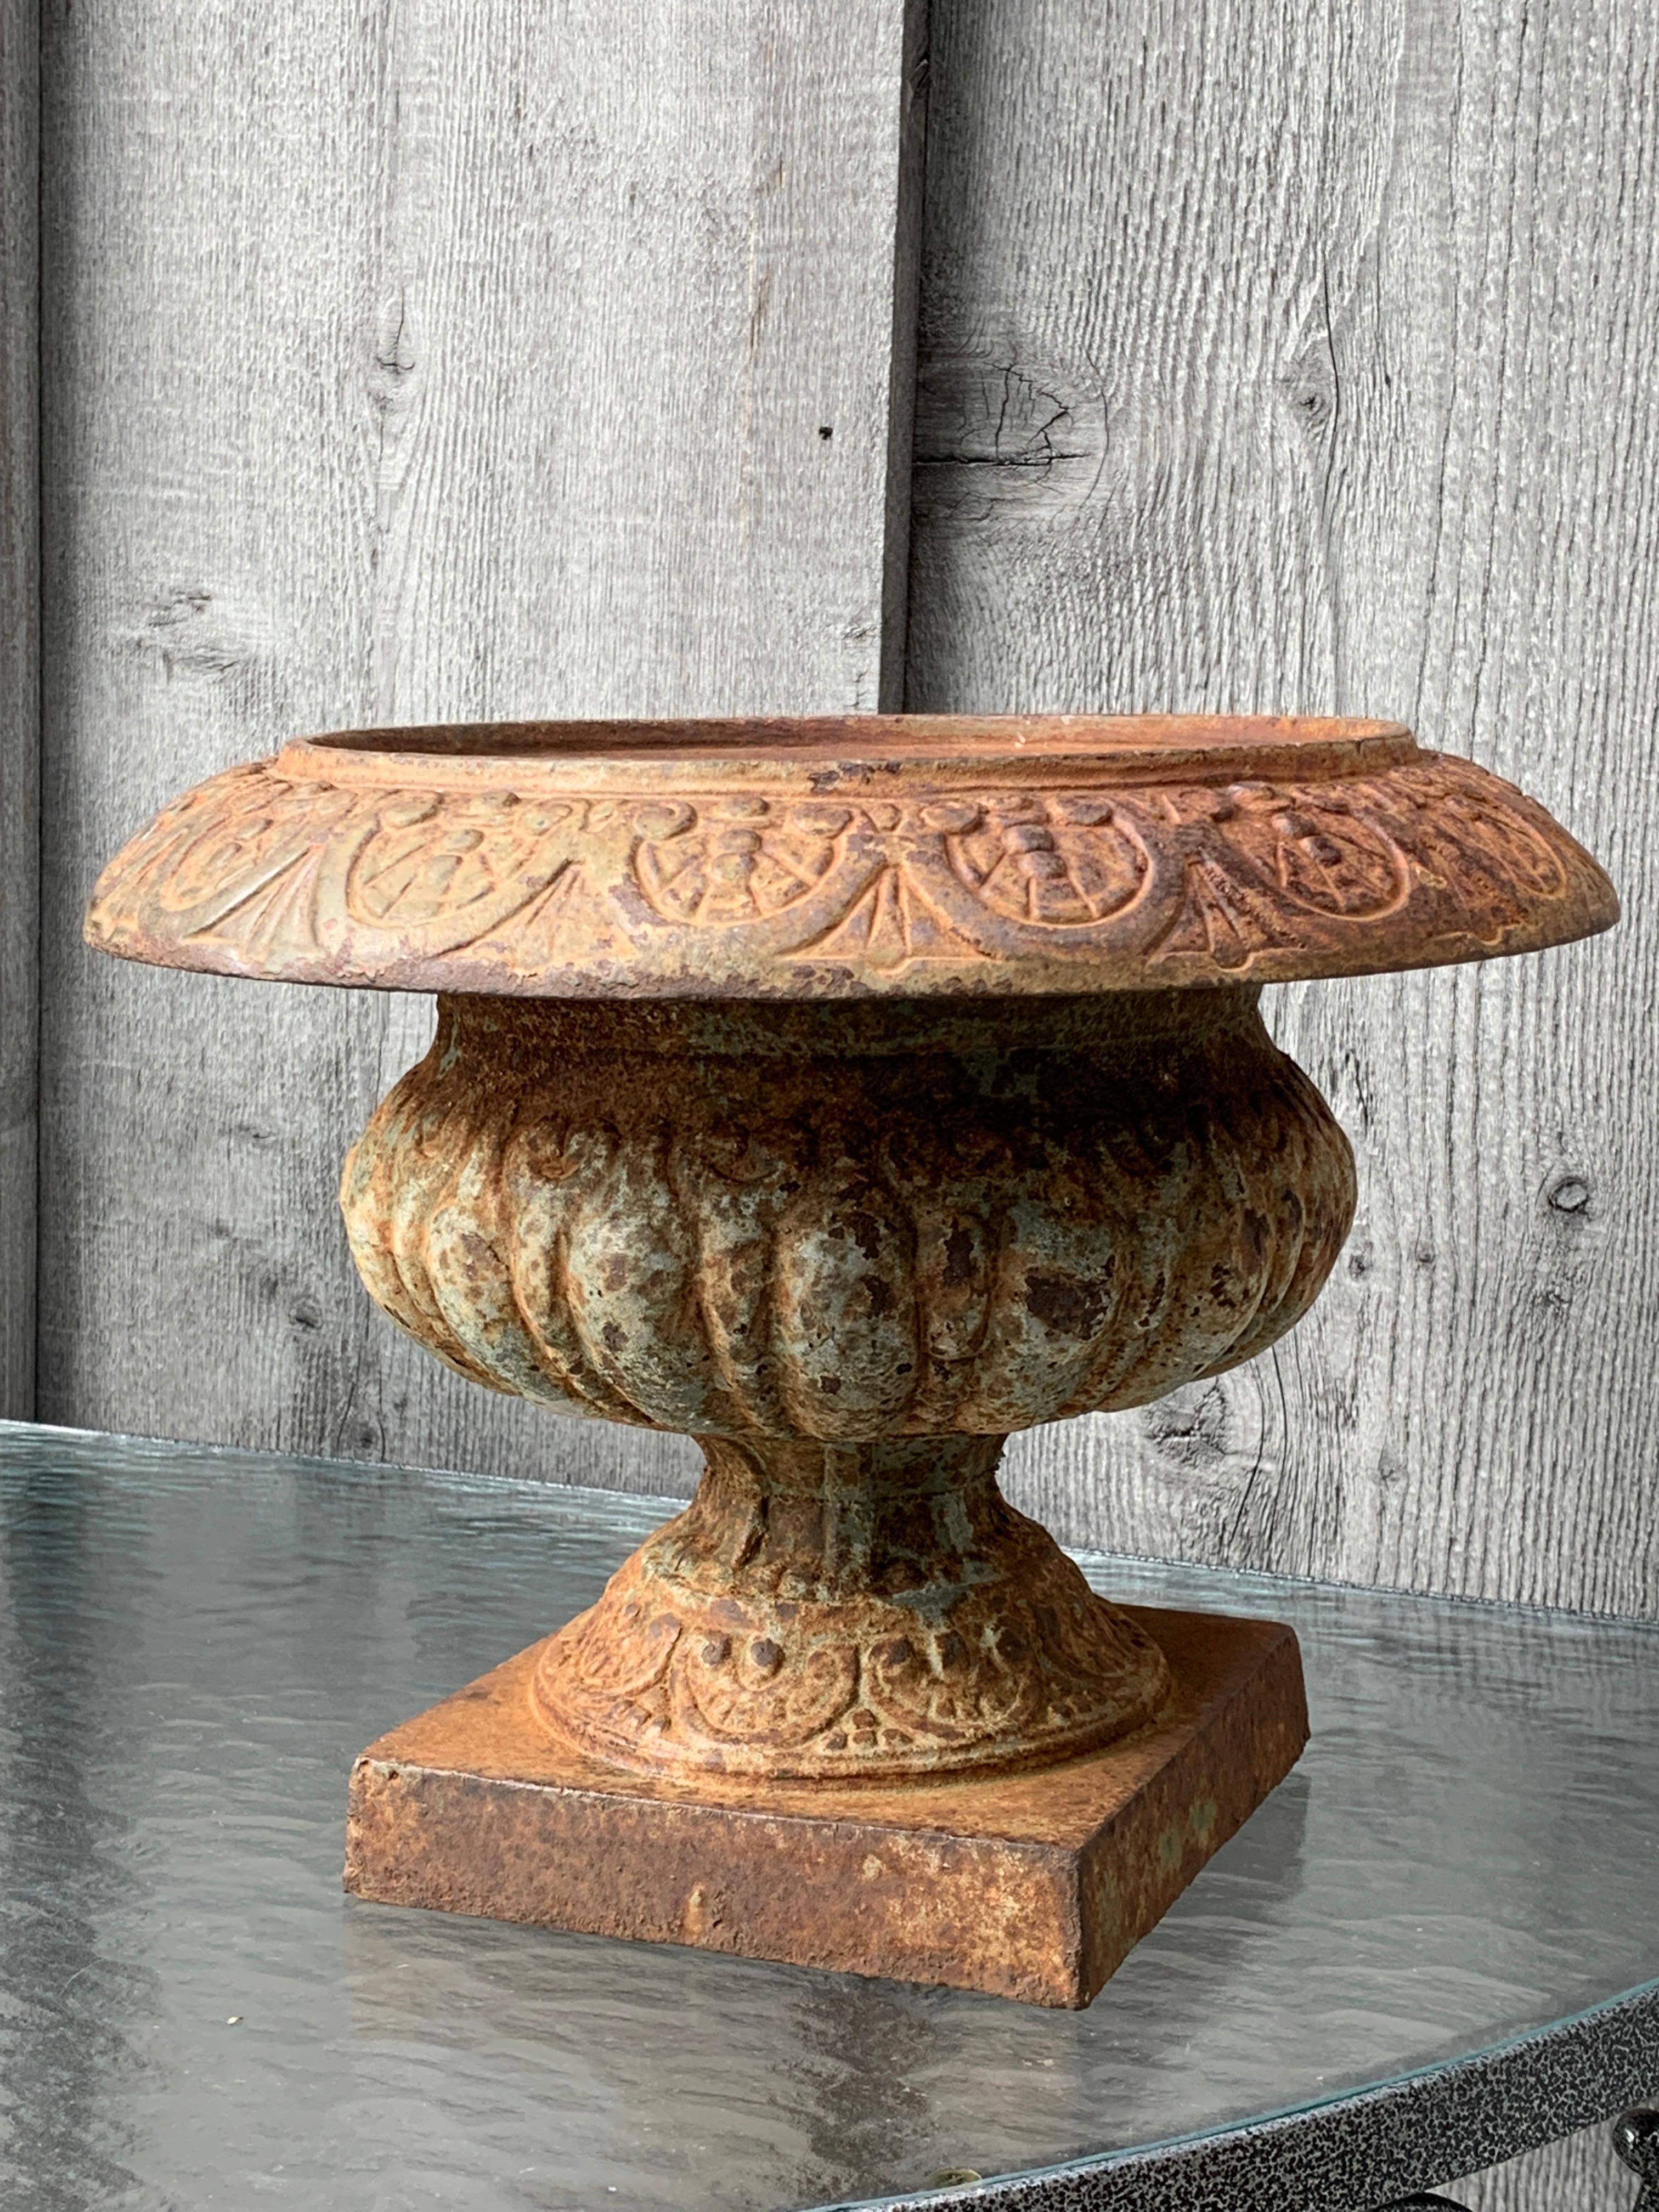 Early pair of small cast iron urns on a footed pedestal. Wonderful aged patina.